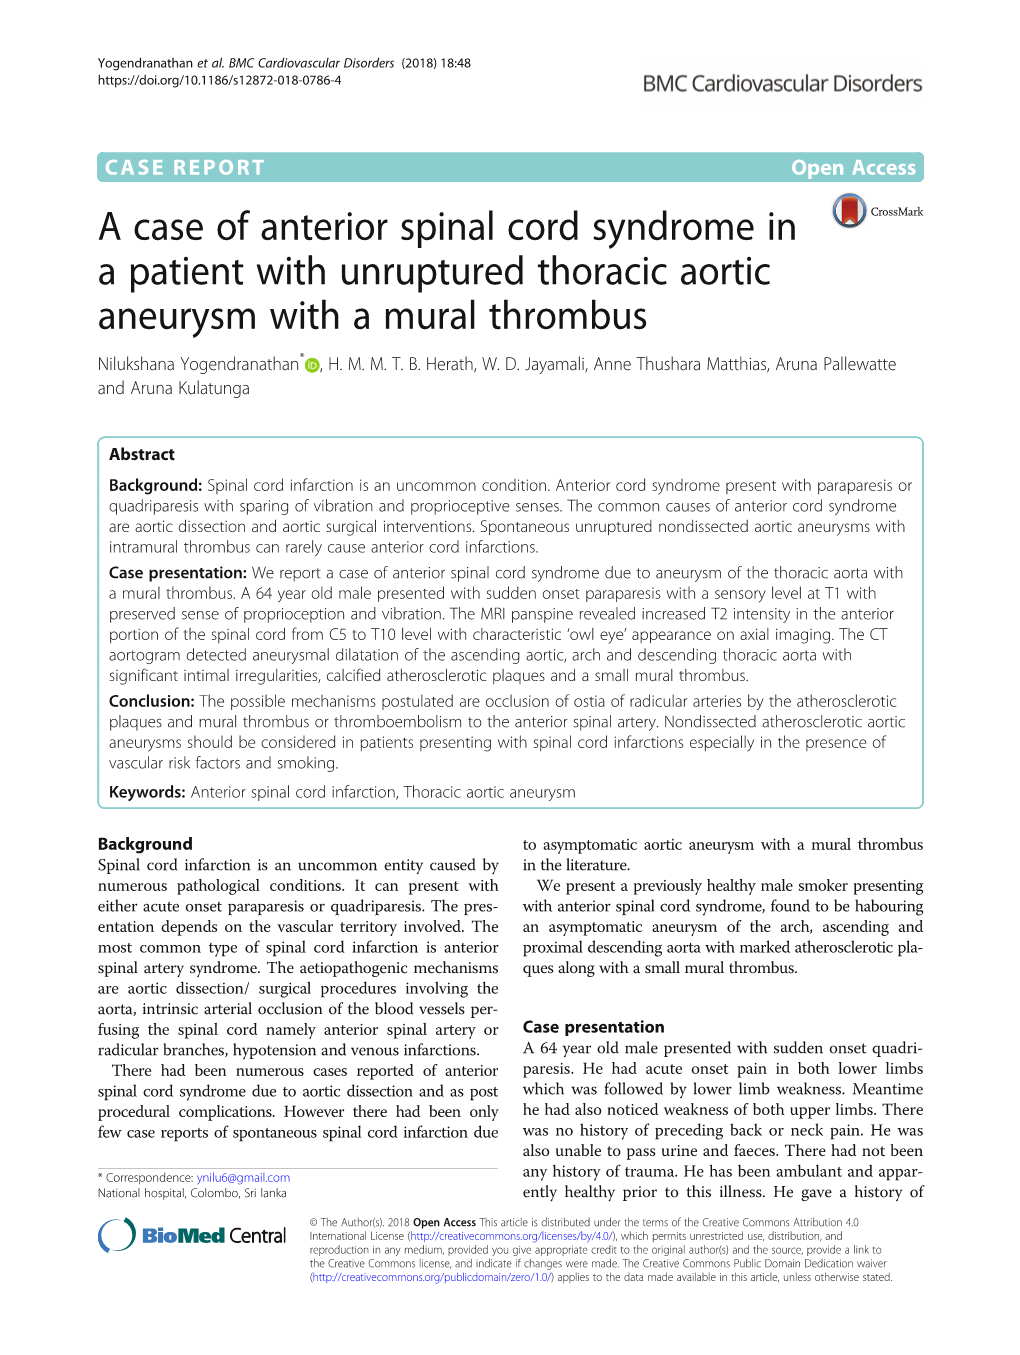 A Case of Anterior Spinal Cord Syndrome in a Patient with Unruptured Thoracic Aortic Aneurysm with a Mural Thrombus Nilukshana Yogendranathan* , H